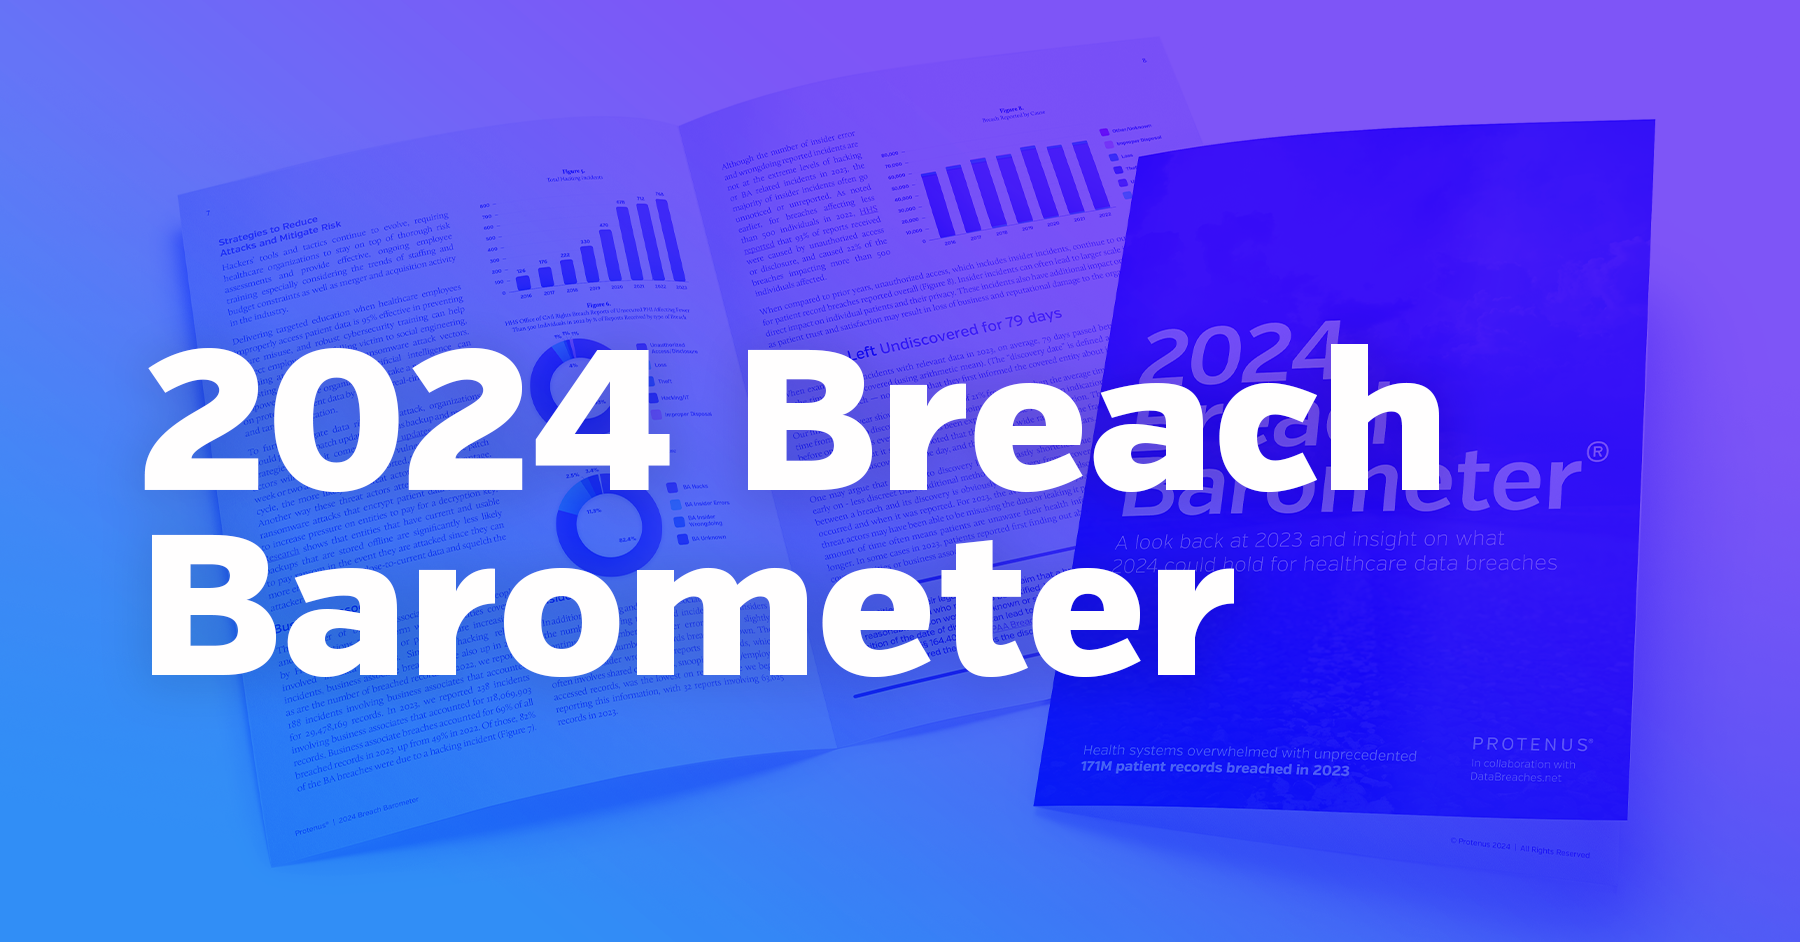 Cybercriminals Exploit Continued Healthcare Industry Disruption According to New Breach Barometer Report